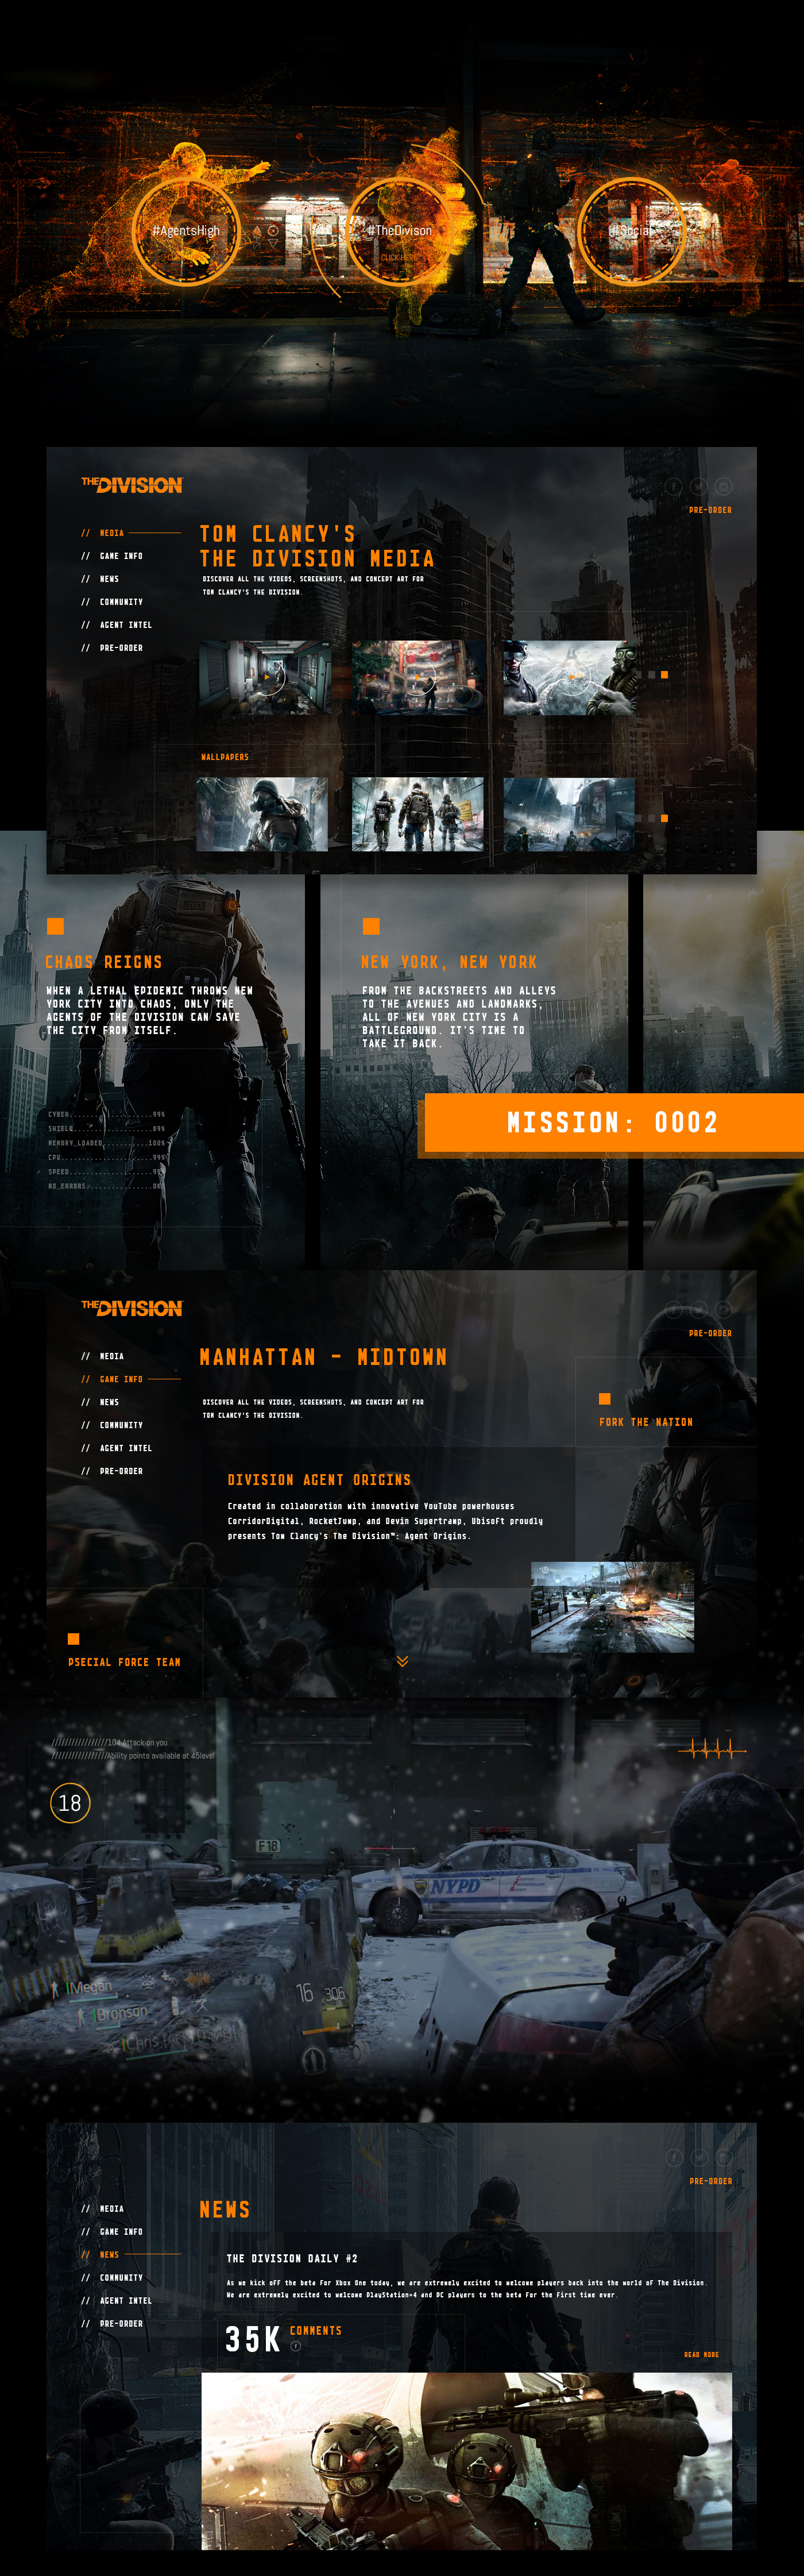 game divison playstation division Tom Clancy interactive Webdesign Layout inspire Sony ubisoft action Shooter Platform action game